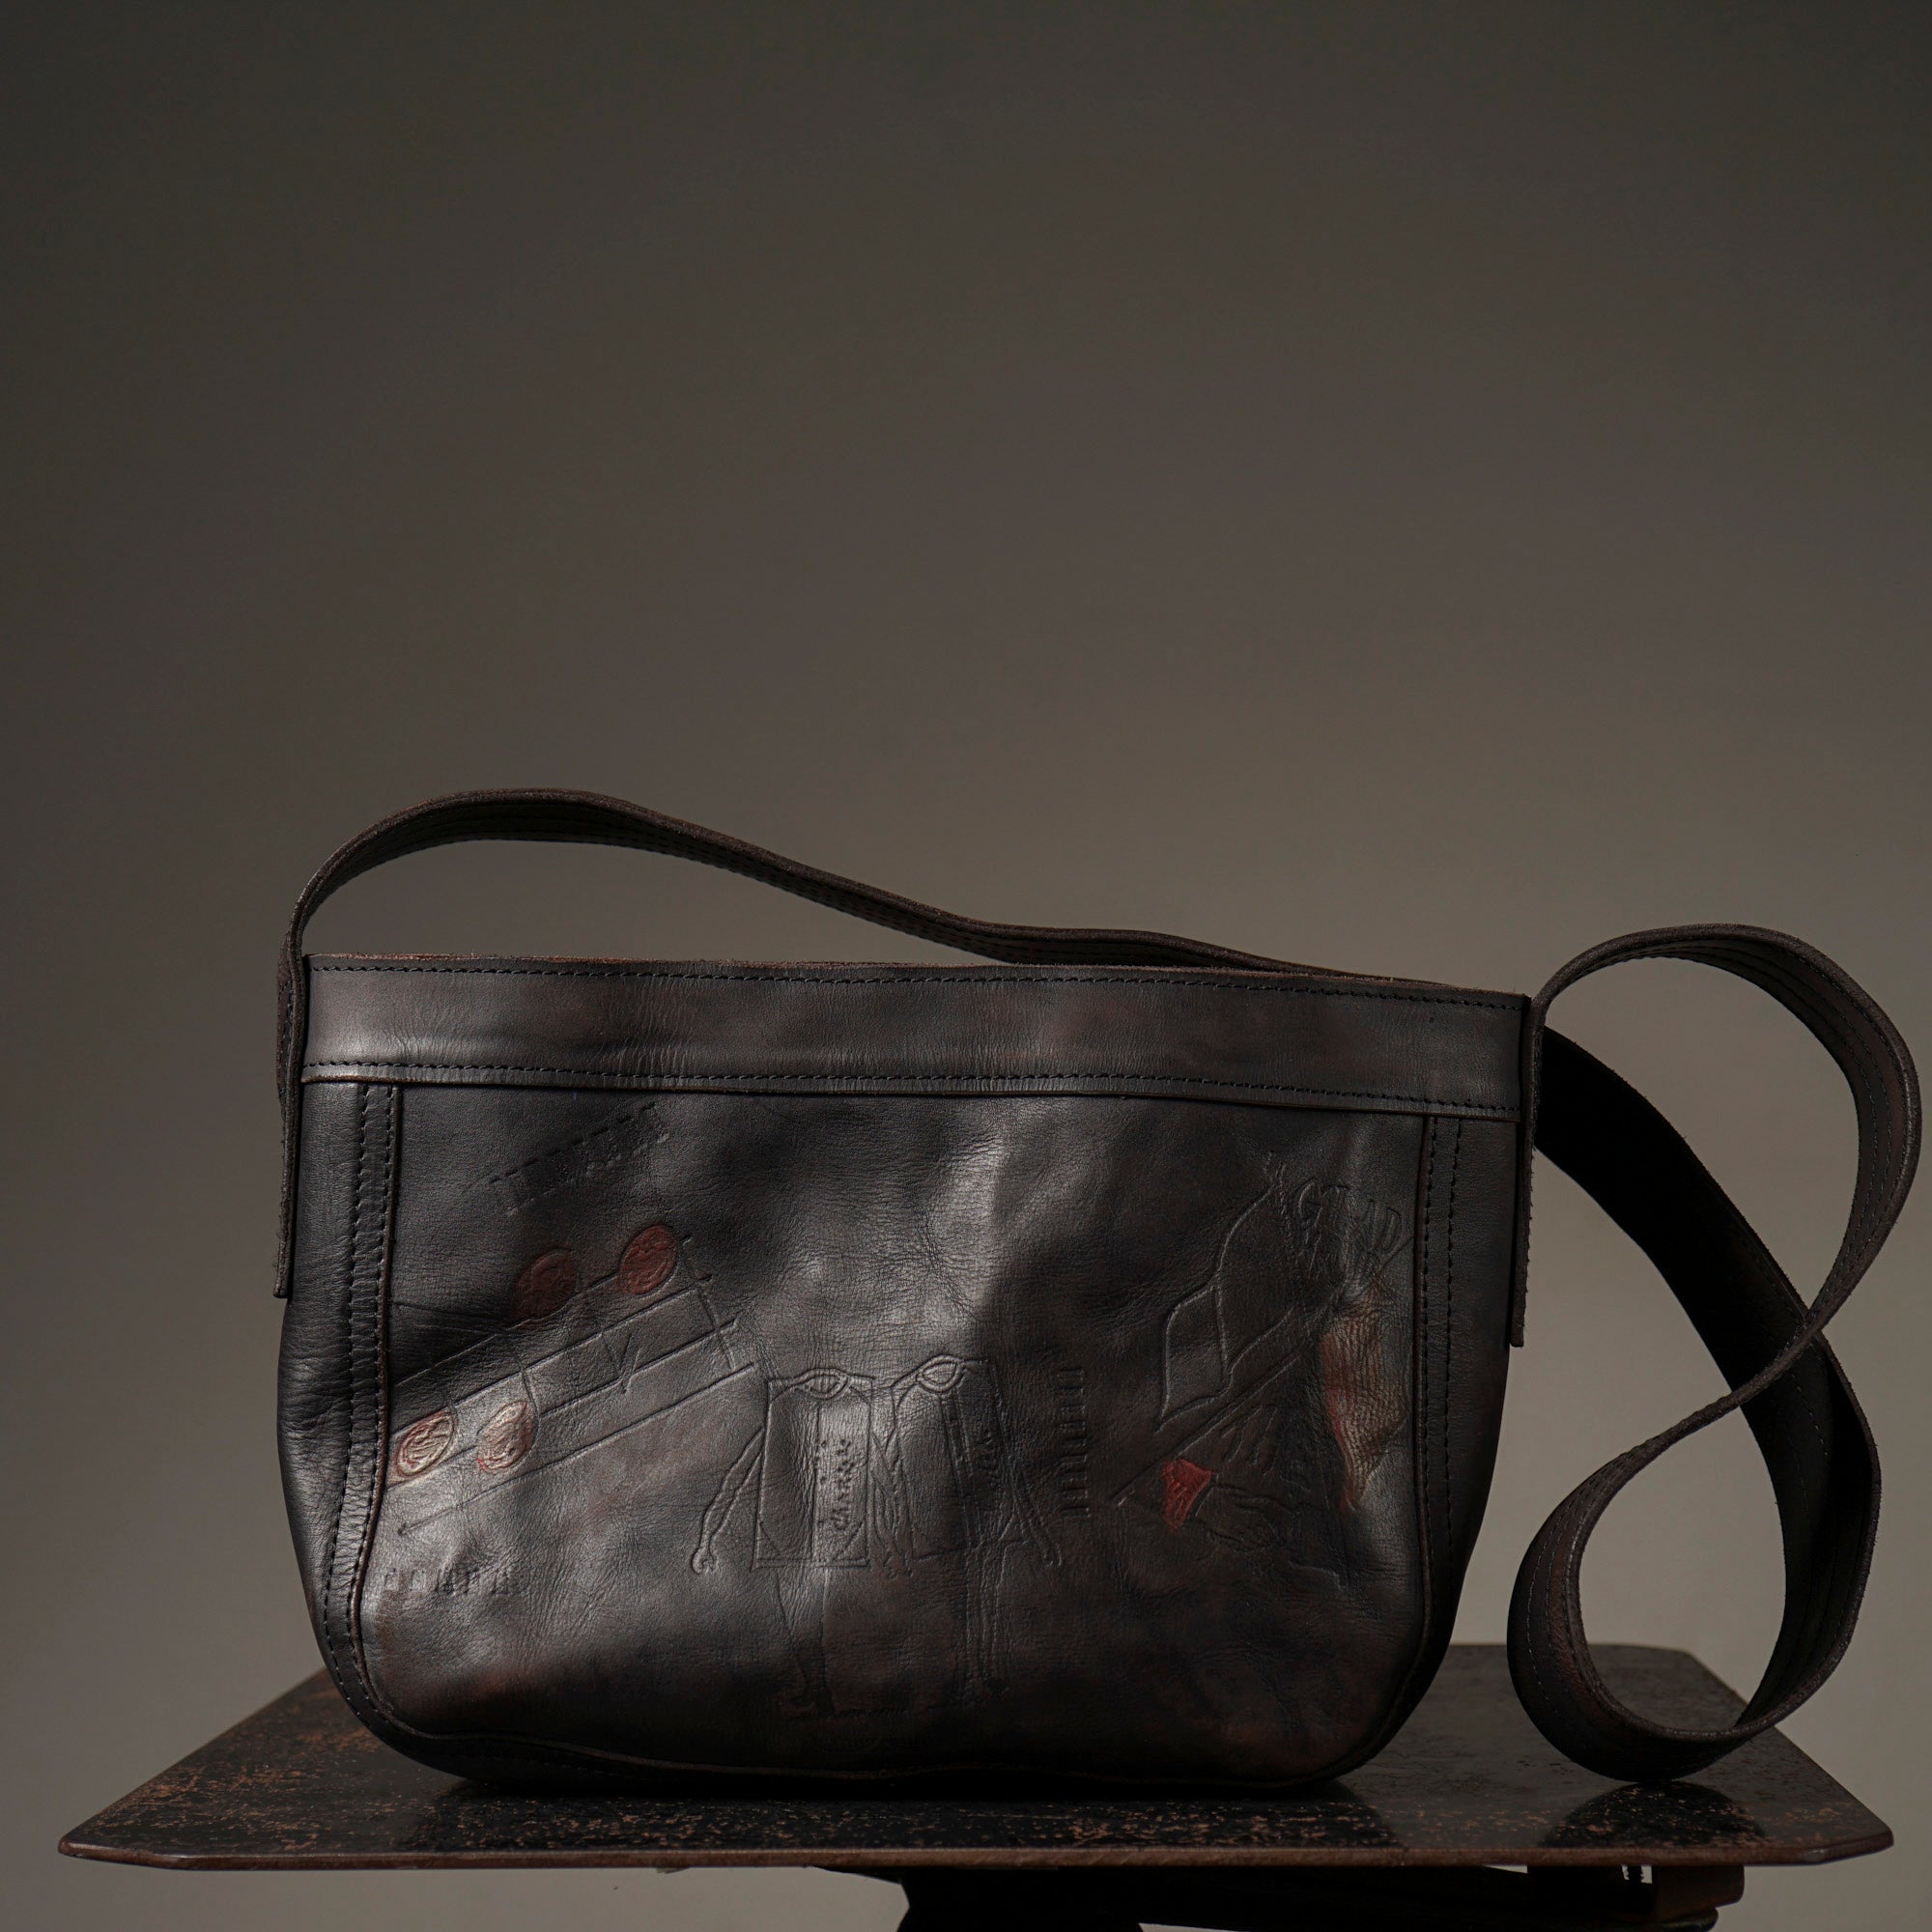 BAG & WALLET – GLADHAND & Co.